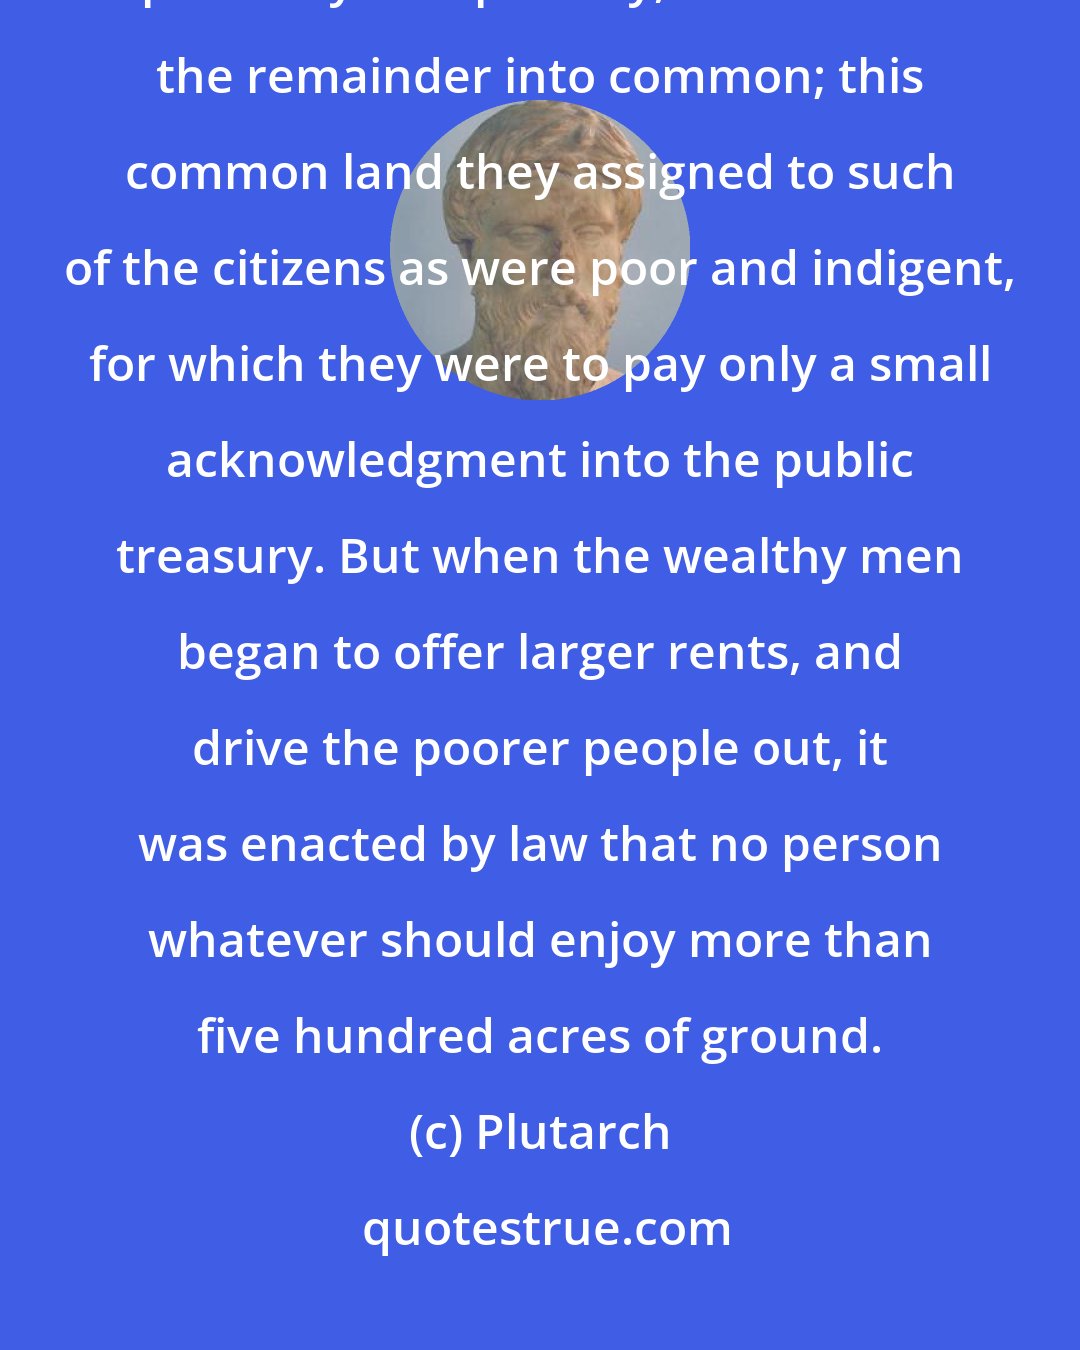 Plutarch: Of the land which the Romans gained by conquest from their neighbours, part they sold publicly, and turned the remainder into common; this common land they assigned to such of the citizens as were poor and indigent, for which they were to pay only a small acknowledgment into the public treasury. But when the wealthy men began to offer larger rents, and drive the poorer people out, it was enacted by law that no person whatever should enjoy more than five hundred acres of ground.